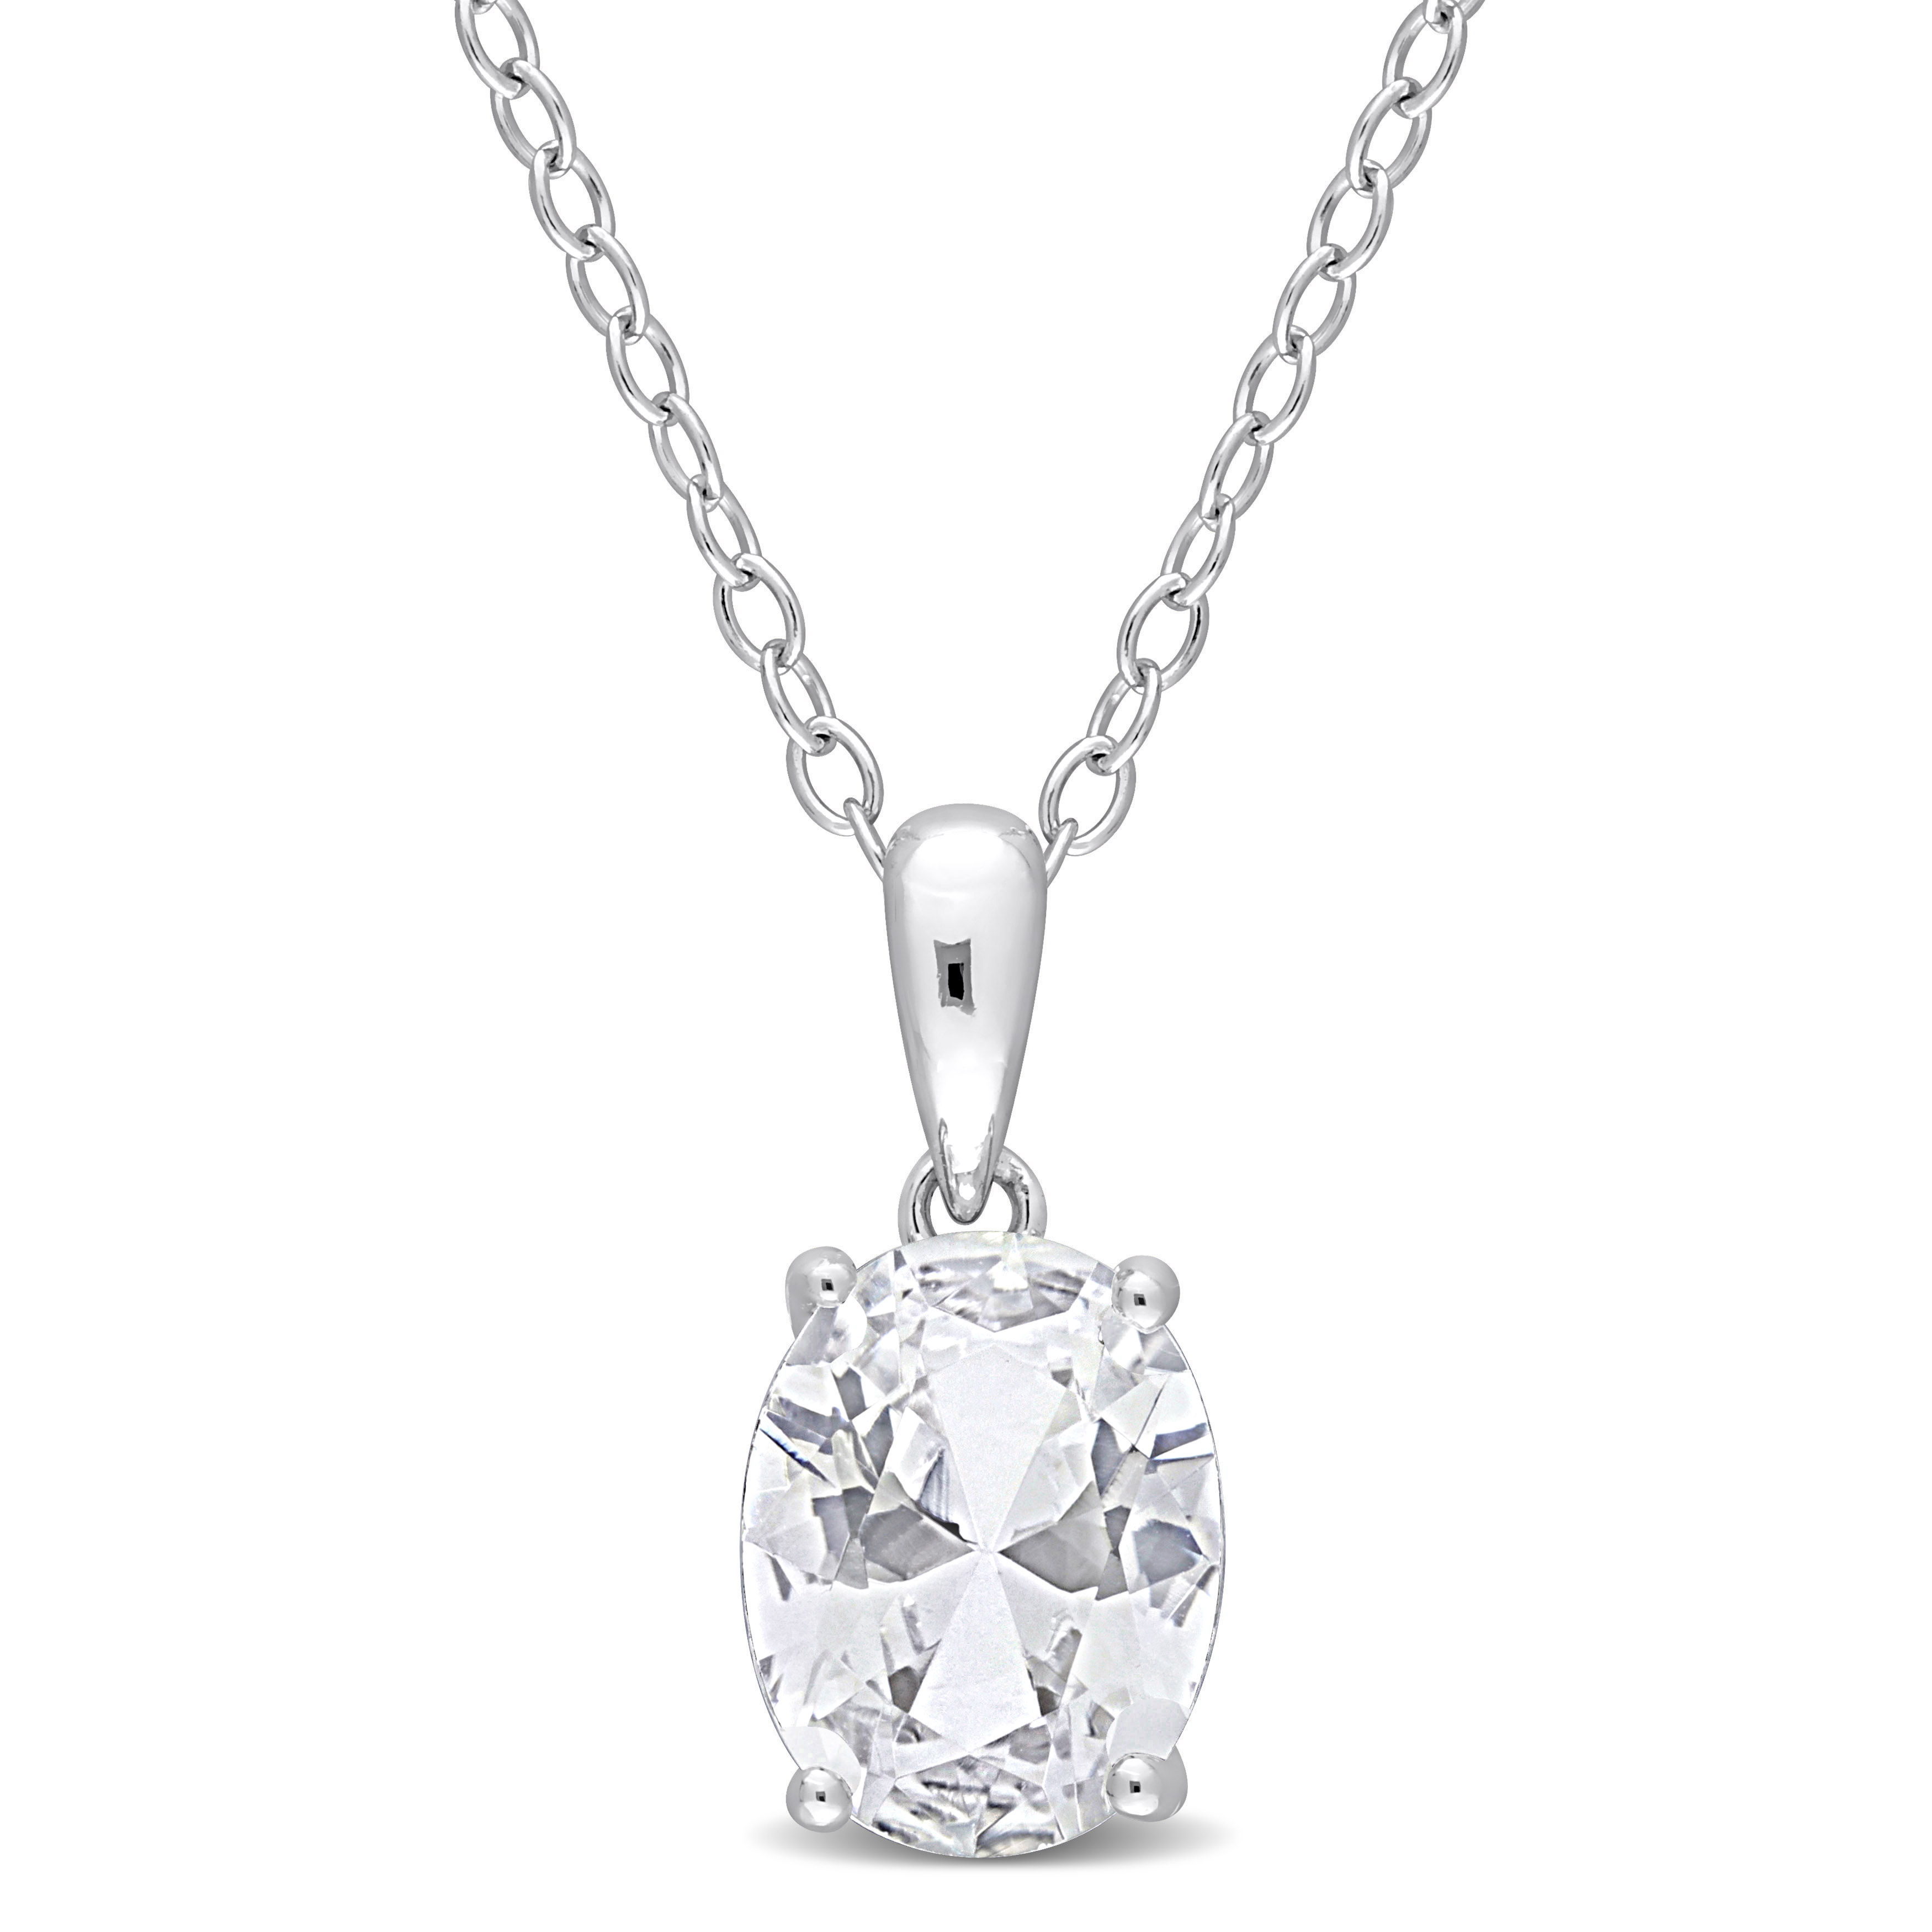 2 1/4 CT TGW Oval White Topaz Solitaire Heart Design Pendant with Chain in Sterling Silver - 18 in.